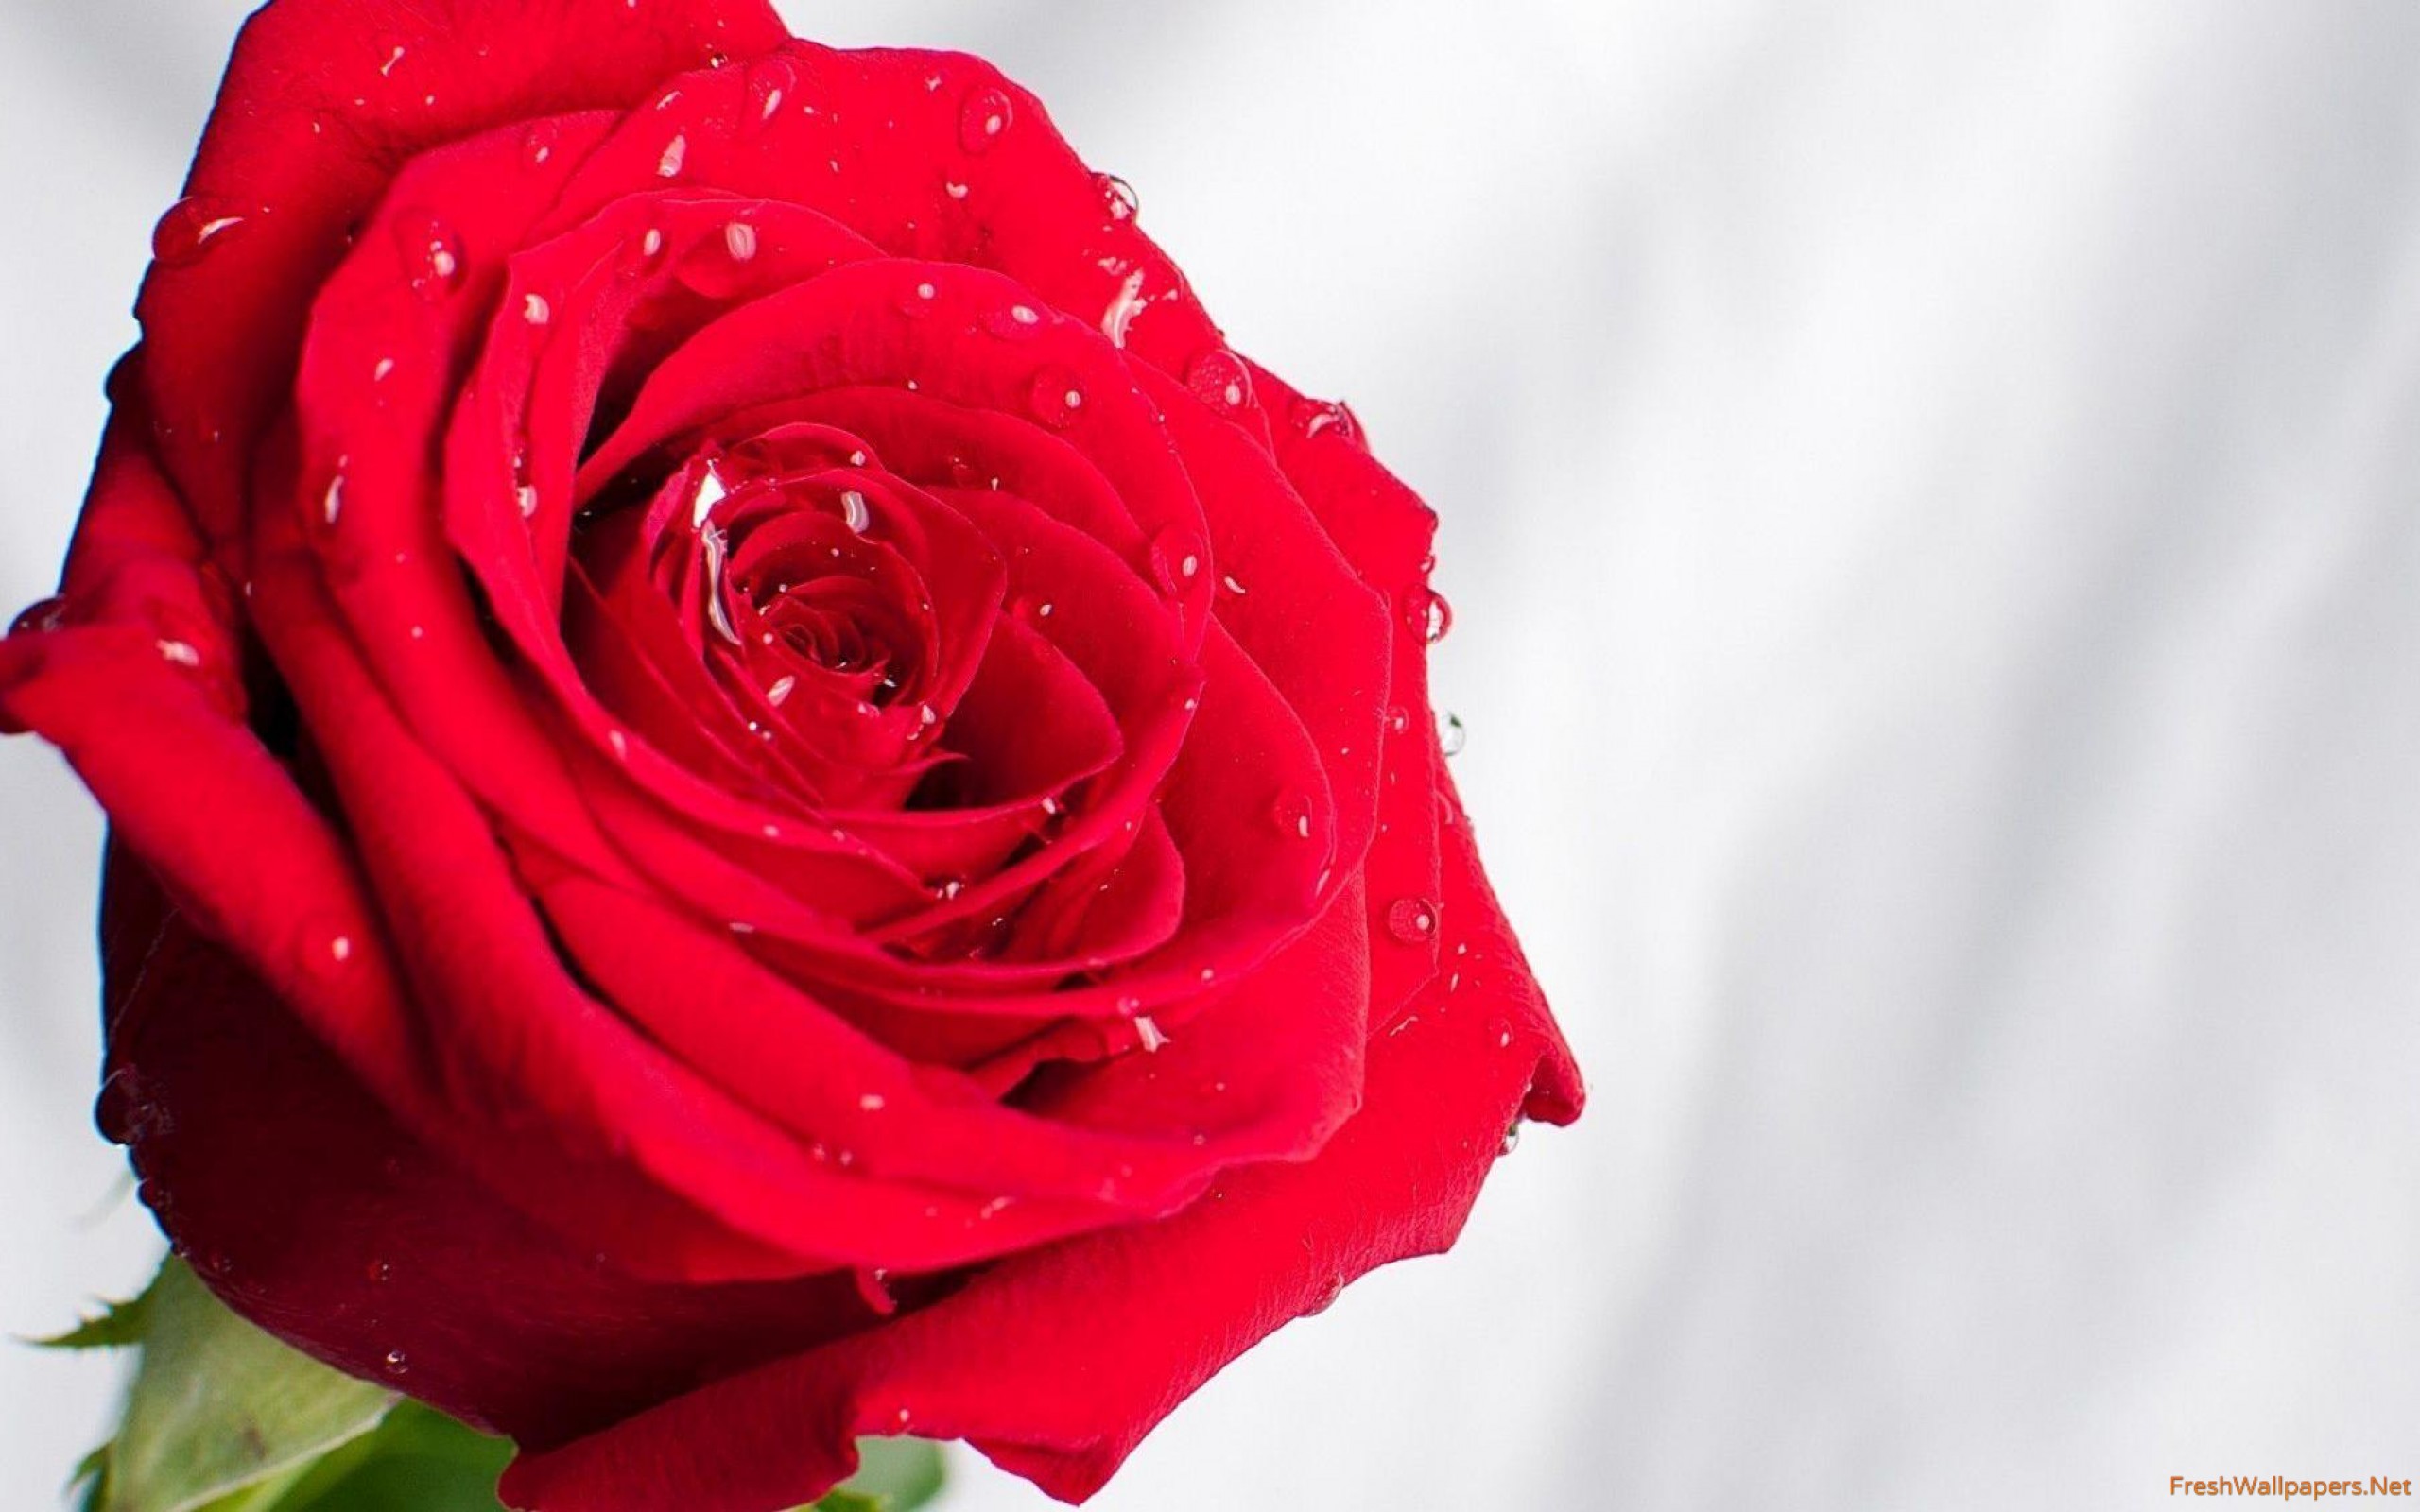 Red Rose With Water Drop Images Hd - HD Wallpaper 